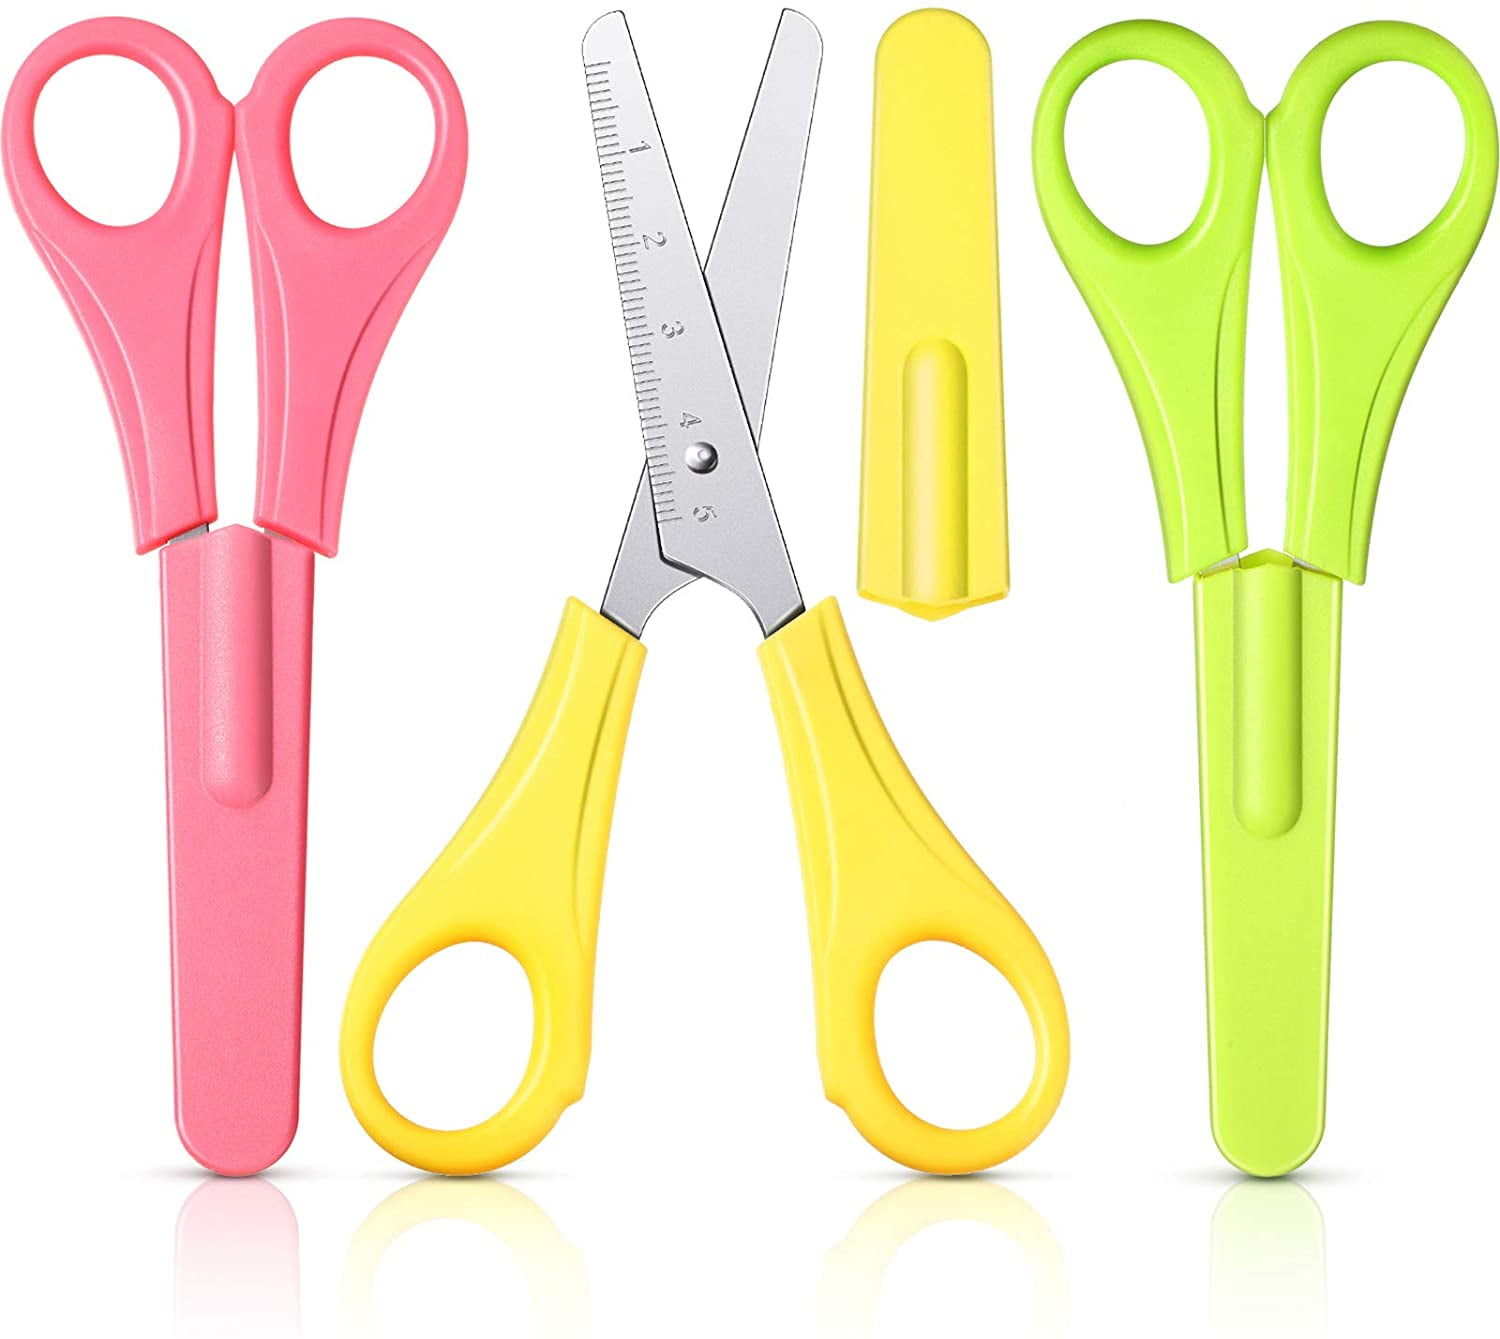  Safety Scissors For Toddler, Kids, Children - Plastic,  Dual-Color Preschool Training Scissors(3 Pack), Paper Cutting(96 Pcs) Set  For Paper Craft Supplies : Arts, Crafts & Sewing